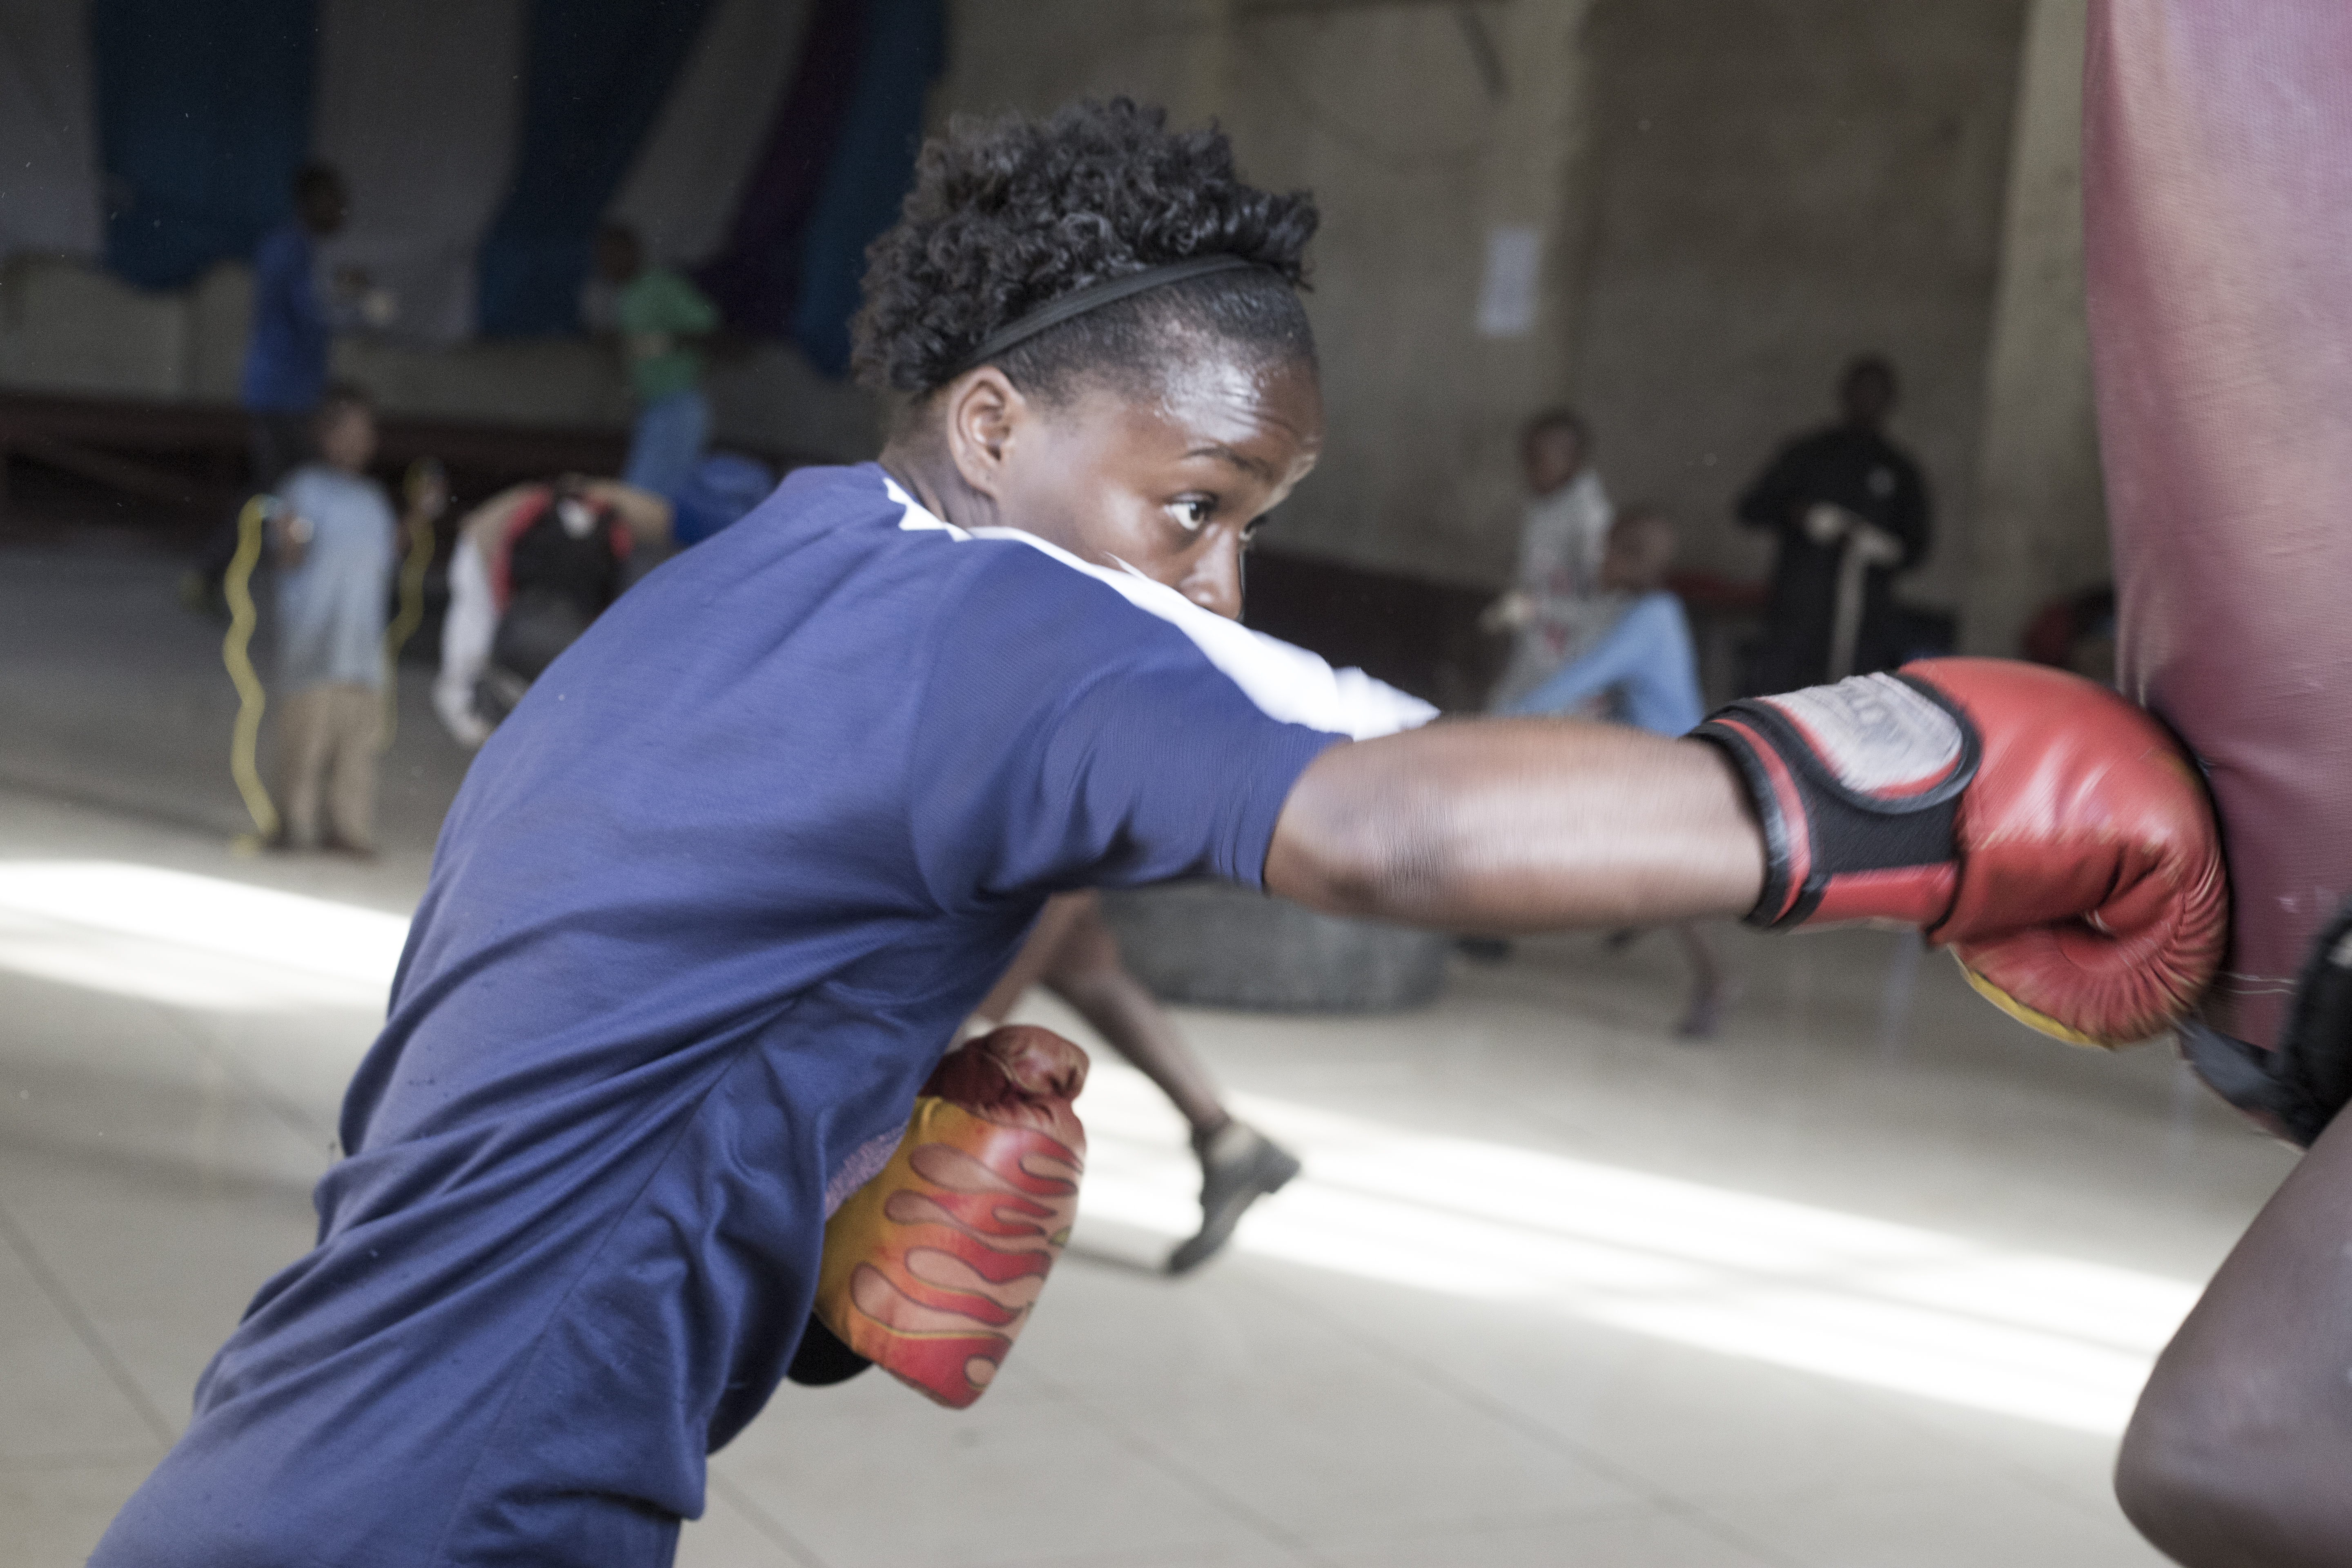 Veronica Mbithe trains at the Dallas Boxing Club in Muthurwa, Nairobi